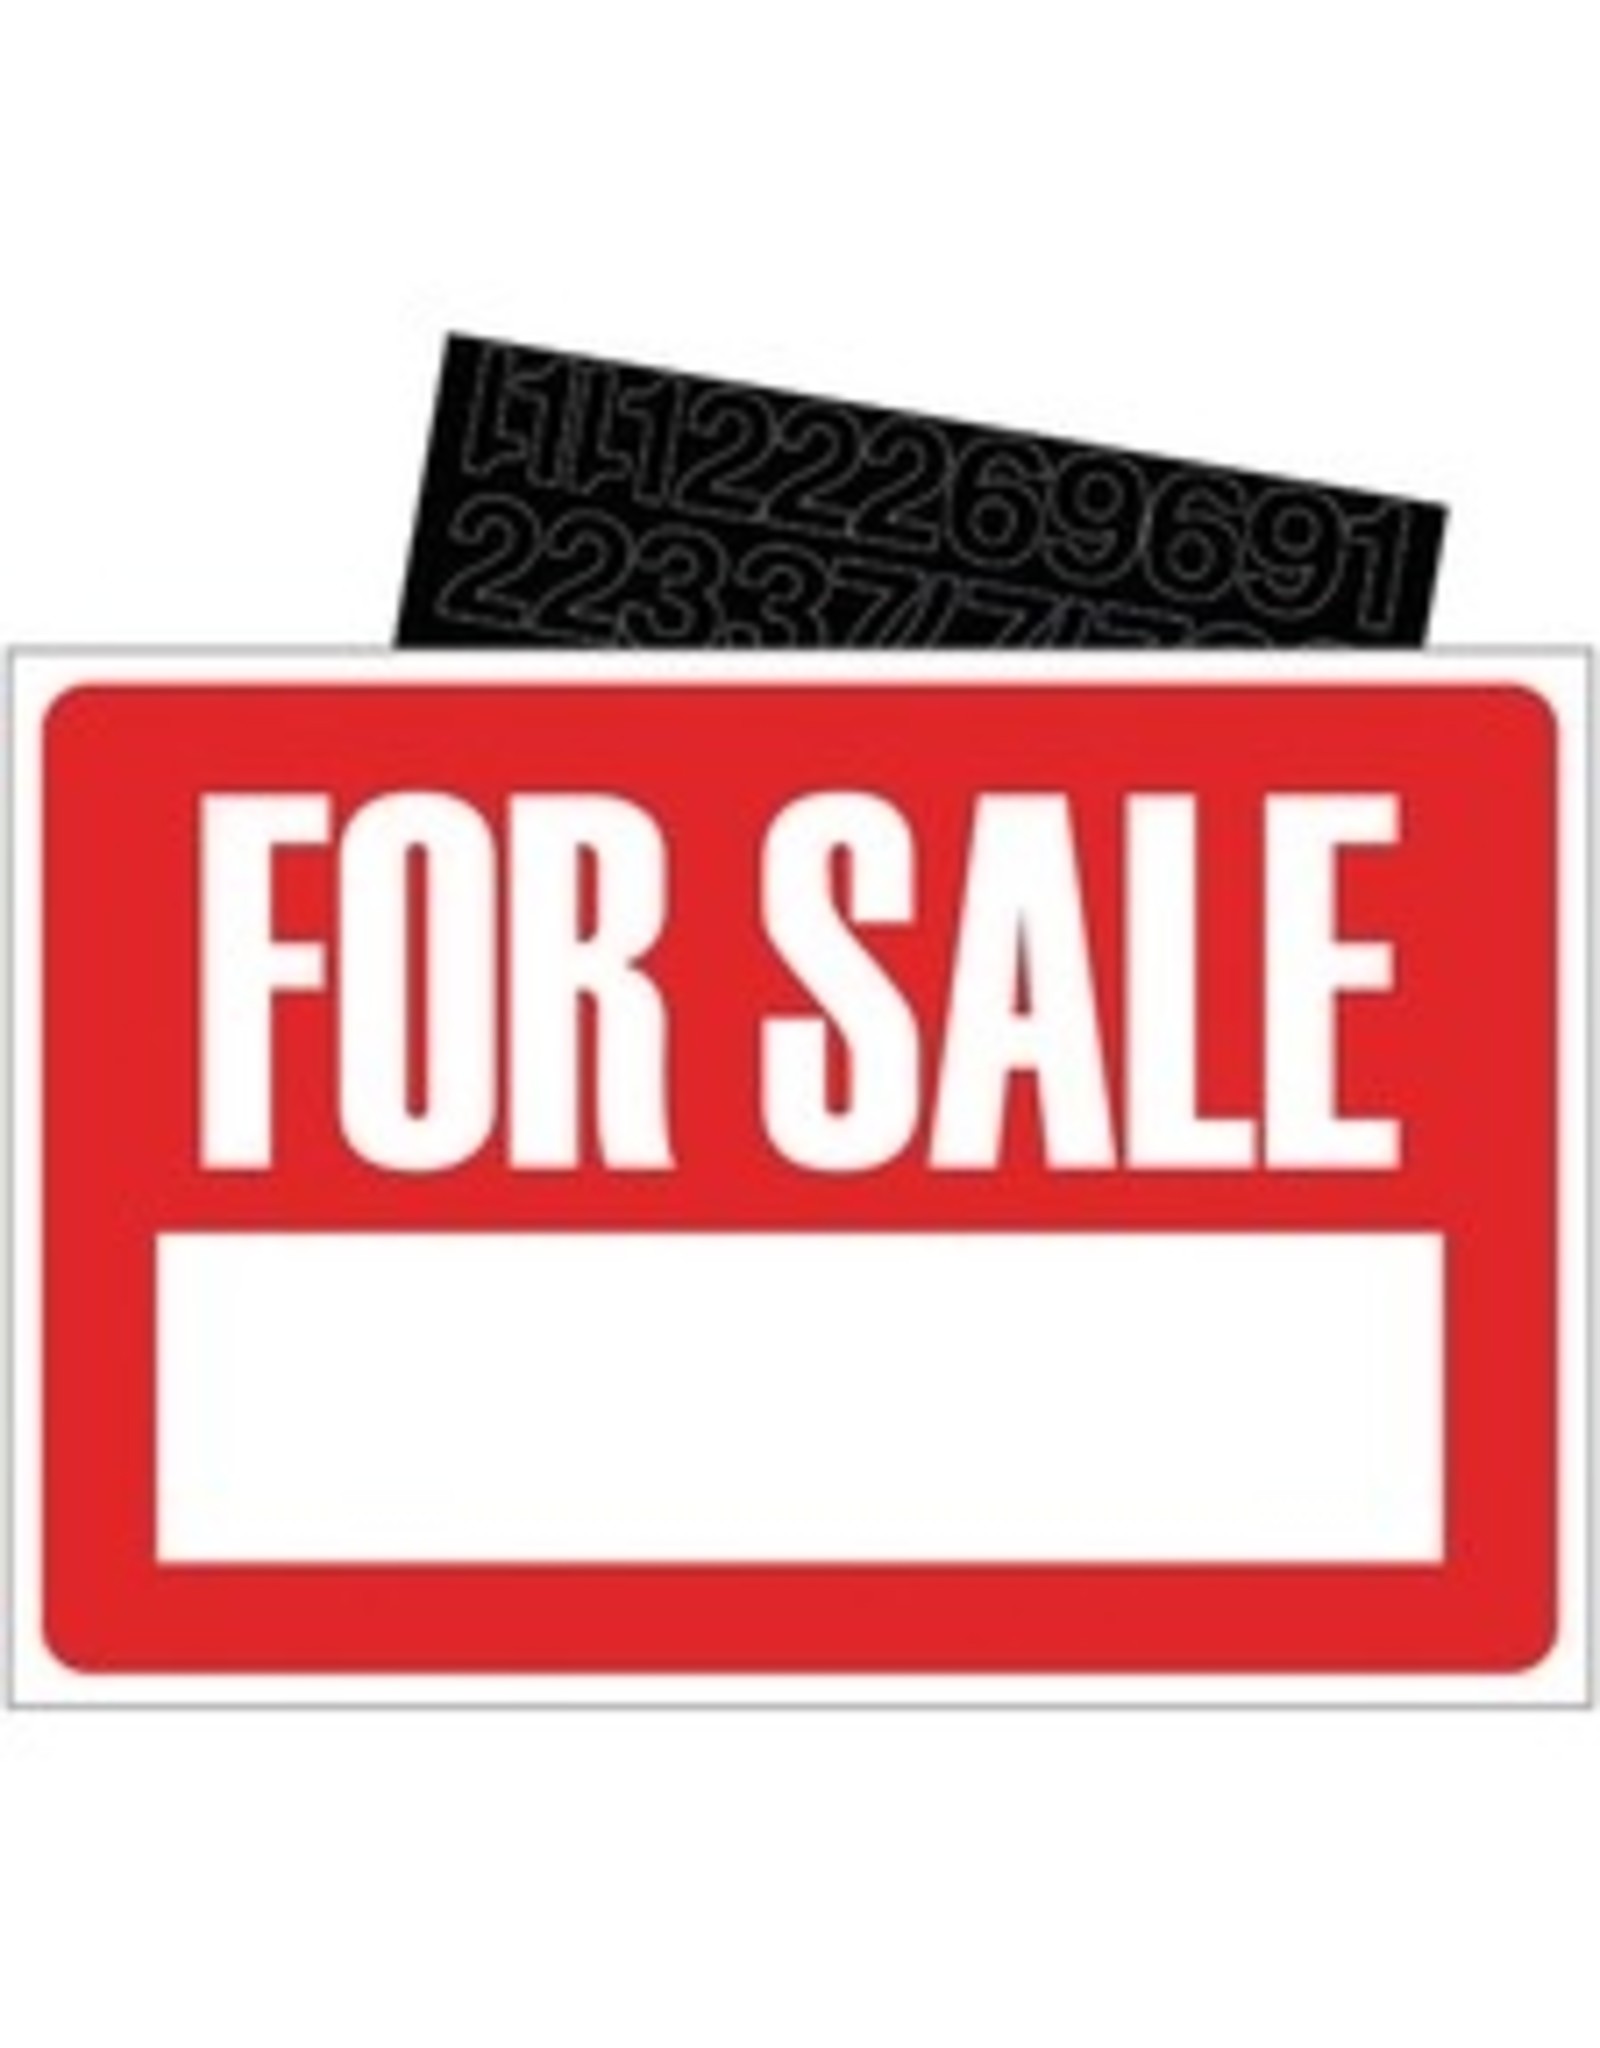 8X12 SIGN KIT FOR SALE WHT/RED